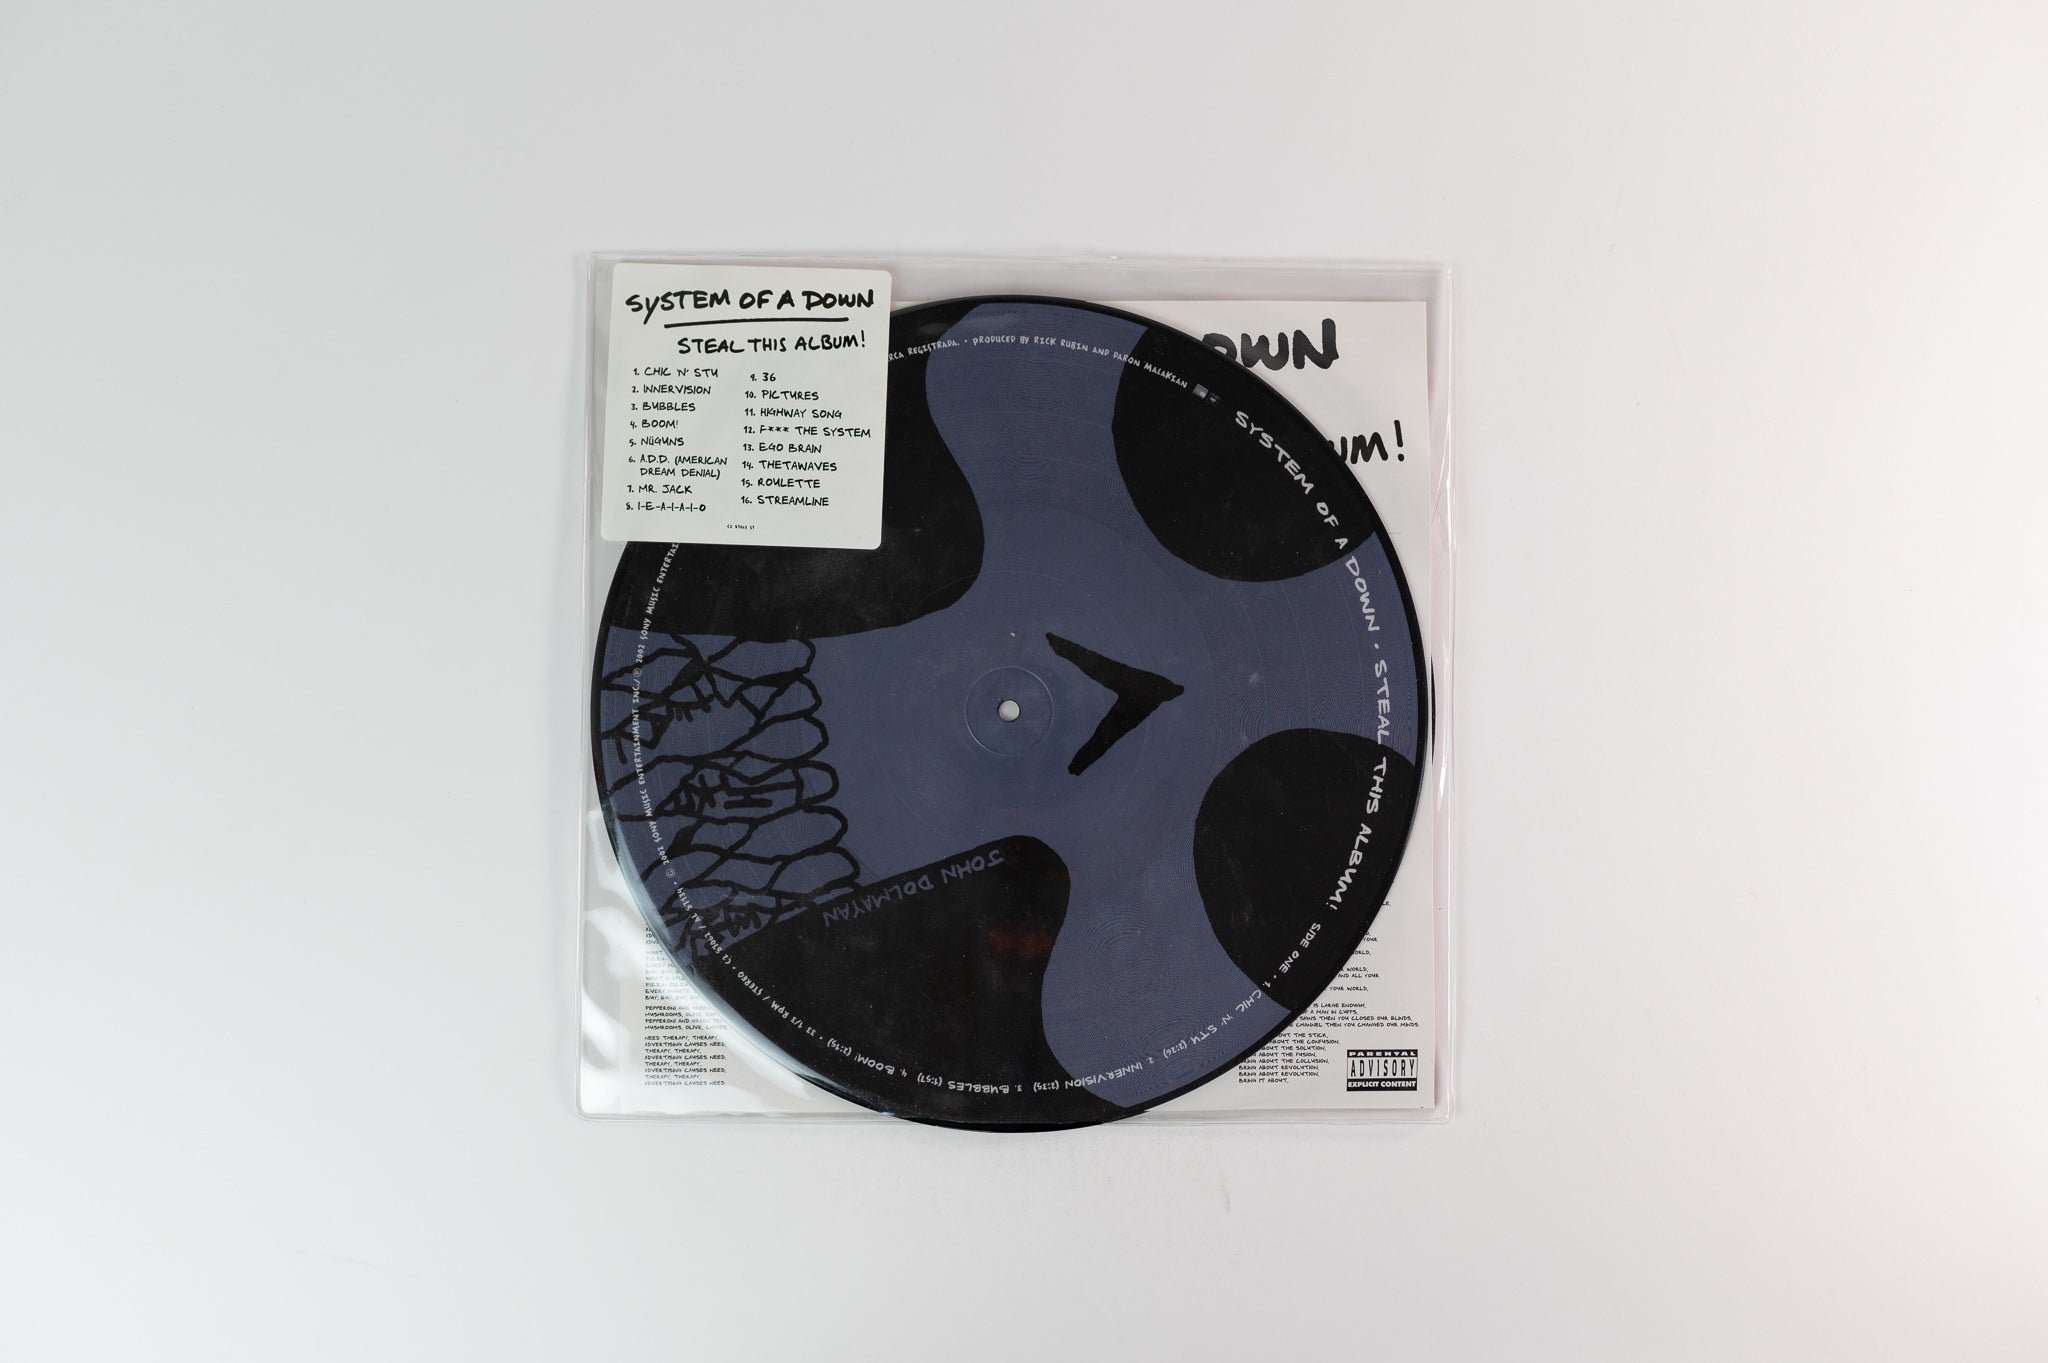 System Of A Down - Steal This Album! on American Recordings Ltd Picture Discs